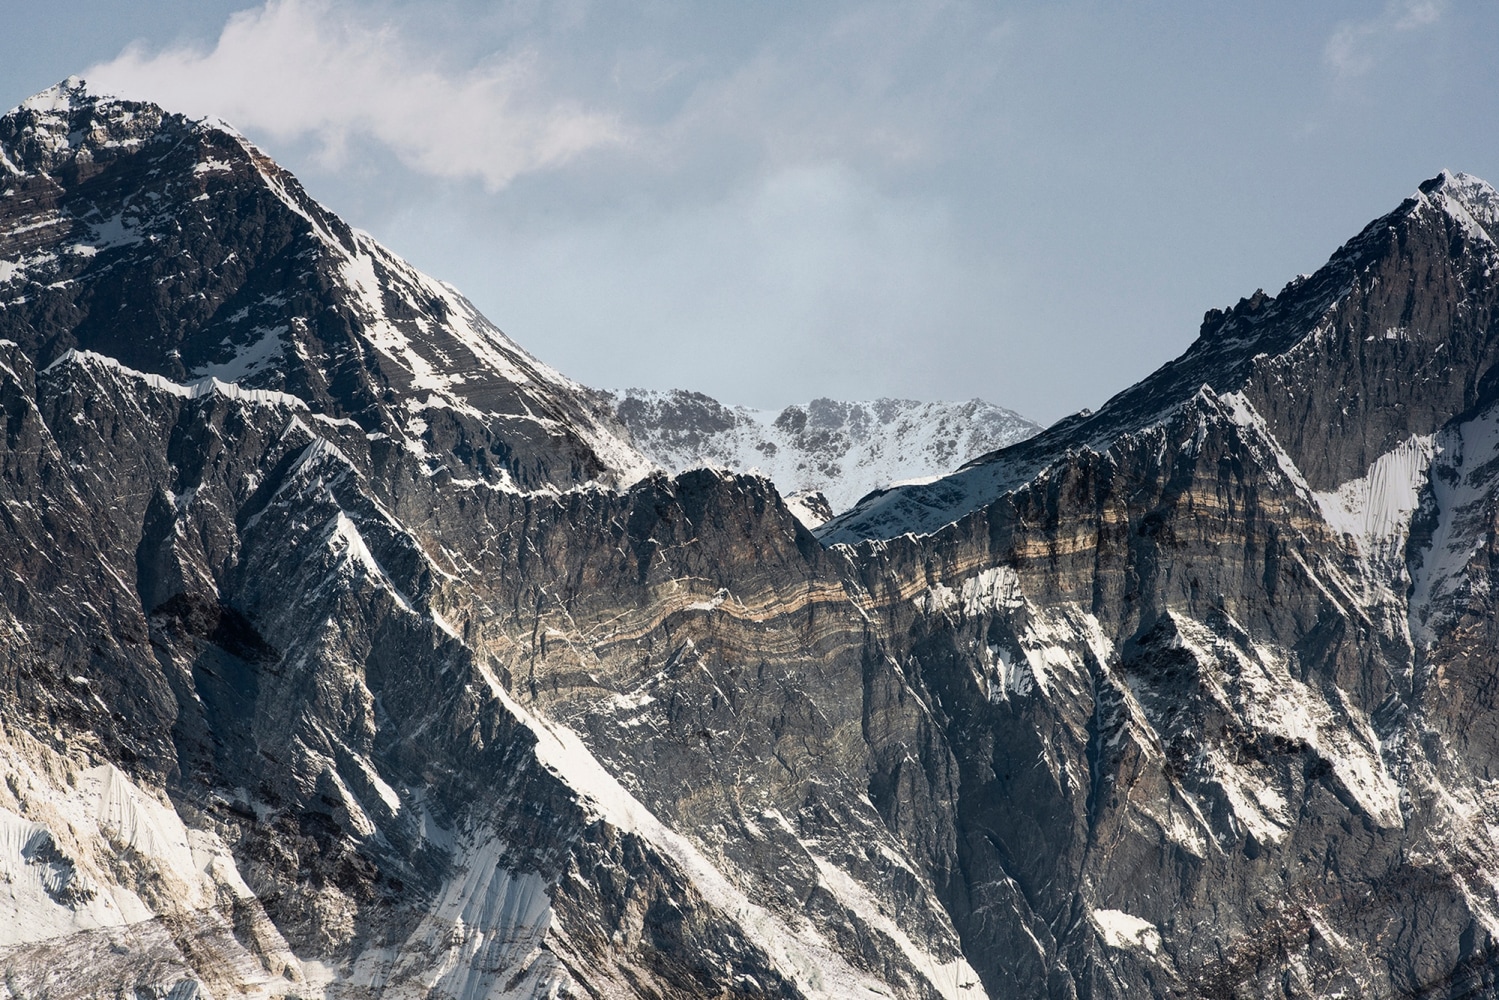 Renate Aller

Mountain Interval, Plate 33
Nepal, Himalayas, Everest Region, Dec. 2016

Archival pigment print

40h x 60w in

Framed: 47 1/2h x 67 1/2w in

1/3

&amp;nbsp;